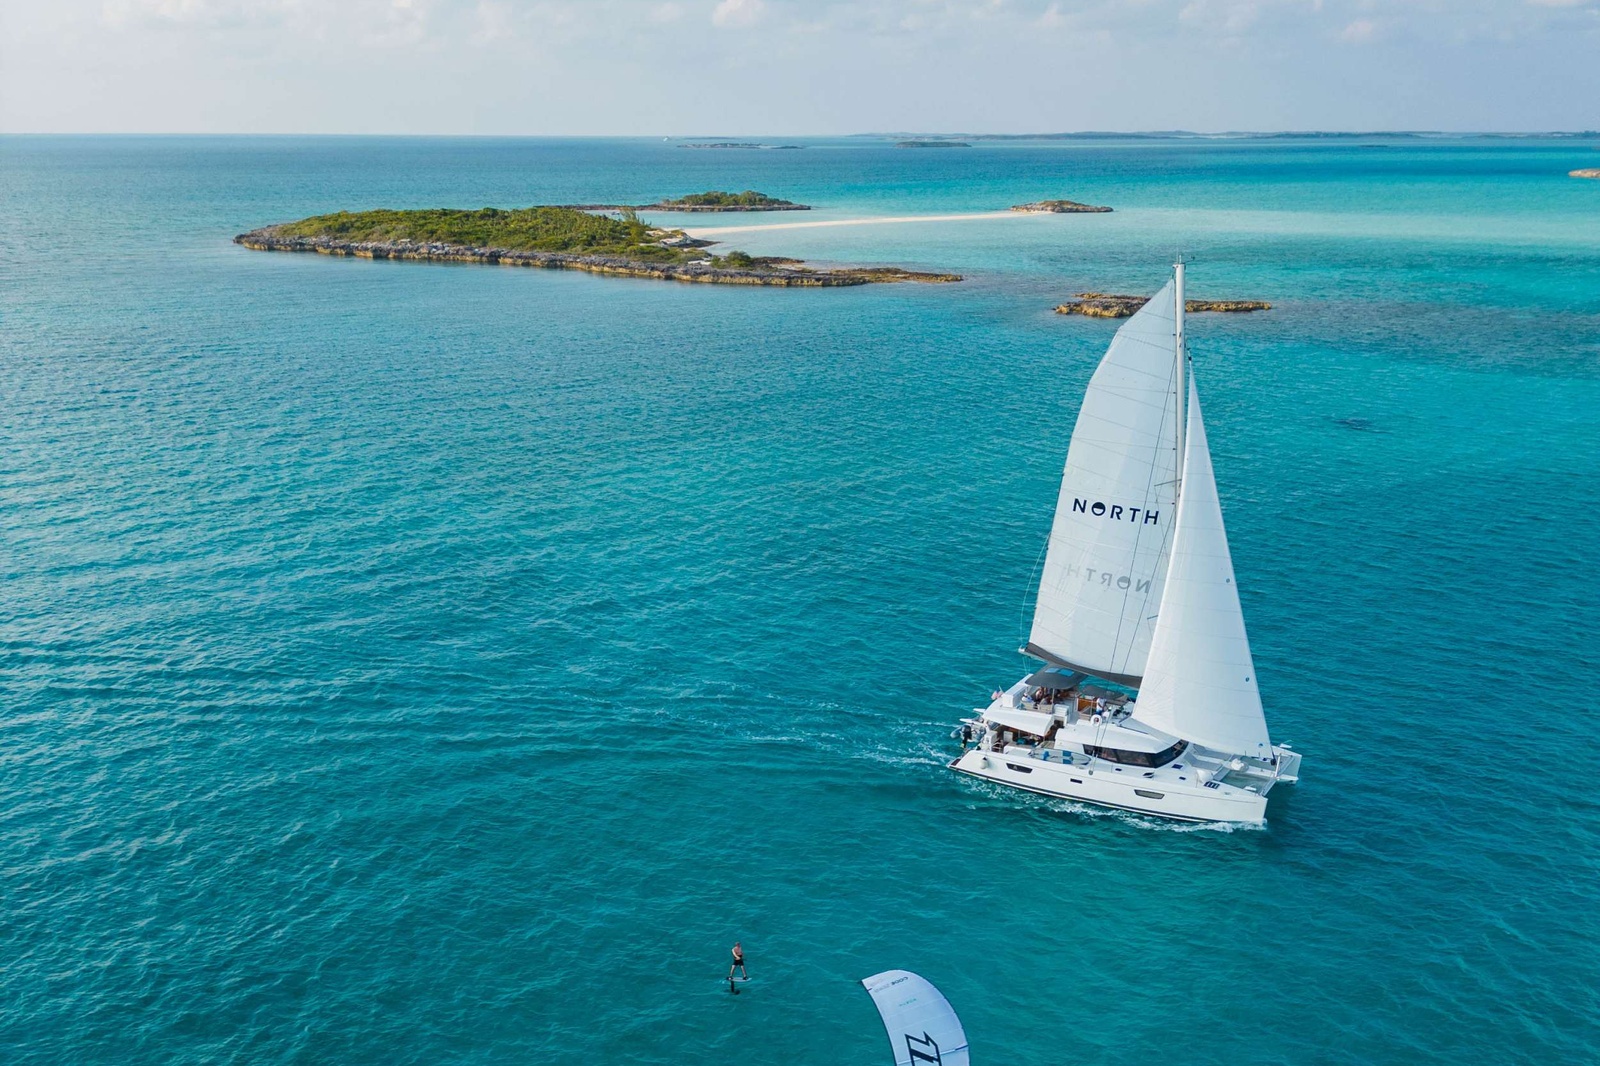 Kitesurfing in The Bahamas is a unique experience; with 700 islands and only 25 are inhabited, offering endless wild islands, white sand bars, off-shore flat water beaches, downwinders and much more. 

Join us and find the best kitesurfing spots and adventure onboard our luxury catamaran. Enjoy paddle boarding, swim with turtles, dolphins, manta rays and even swimming pigs! You can go fishing, find swells for surfing and sail between the magnificent islands, the options are endless!